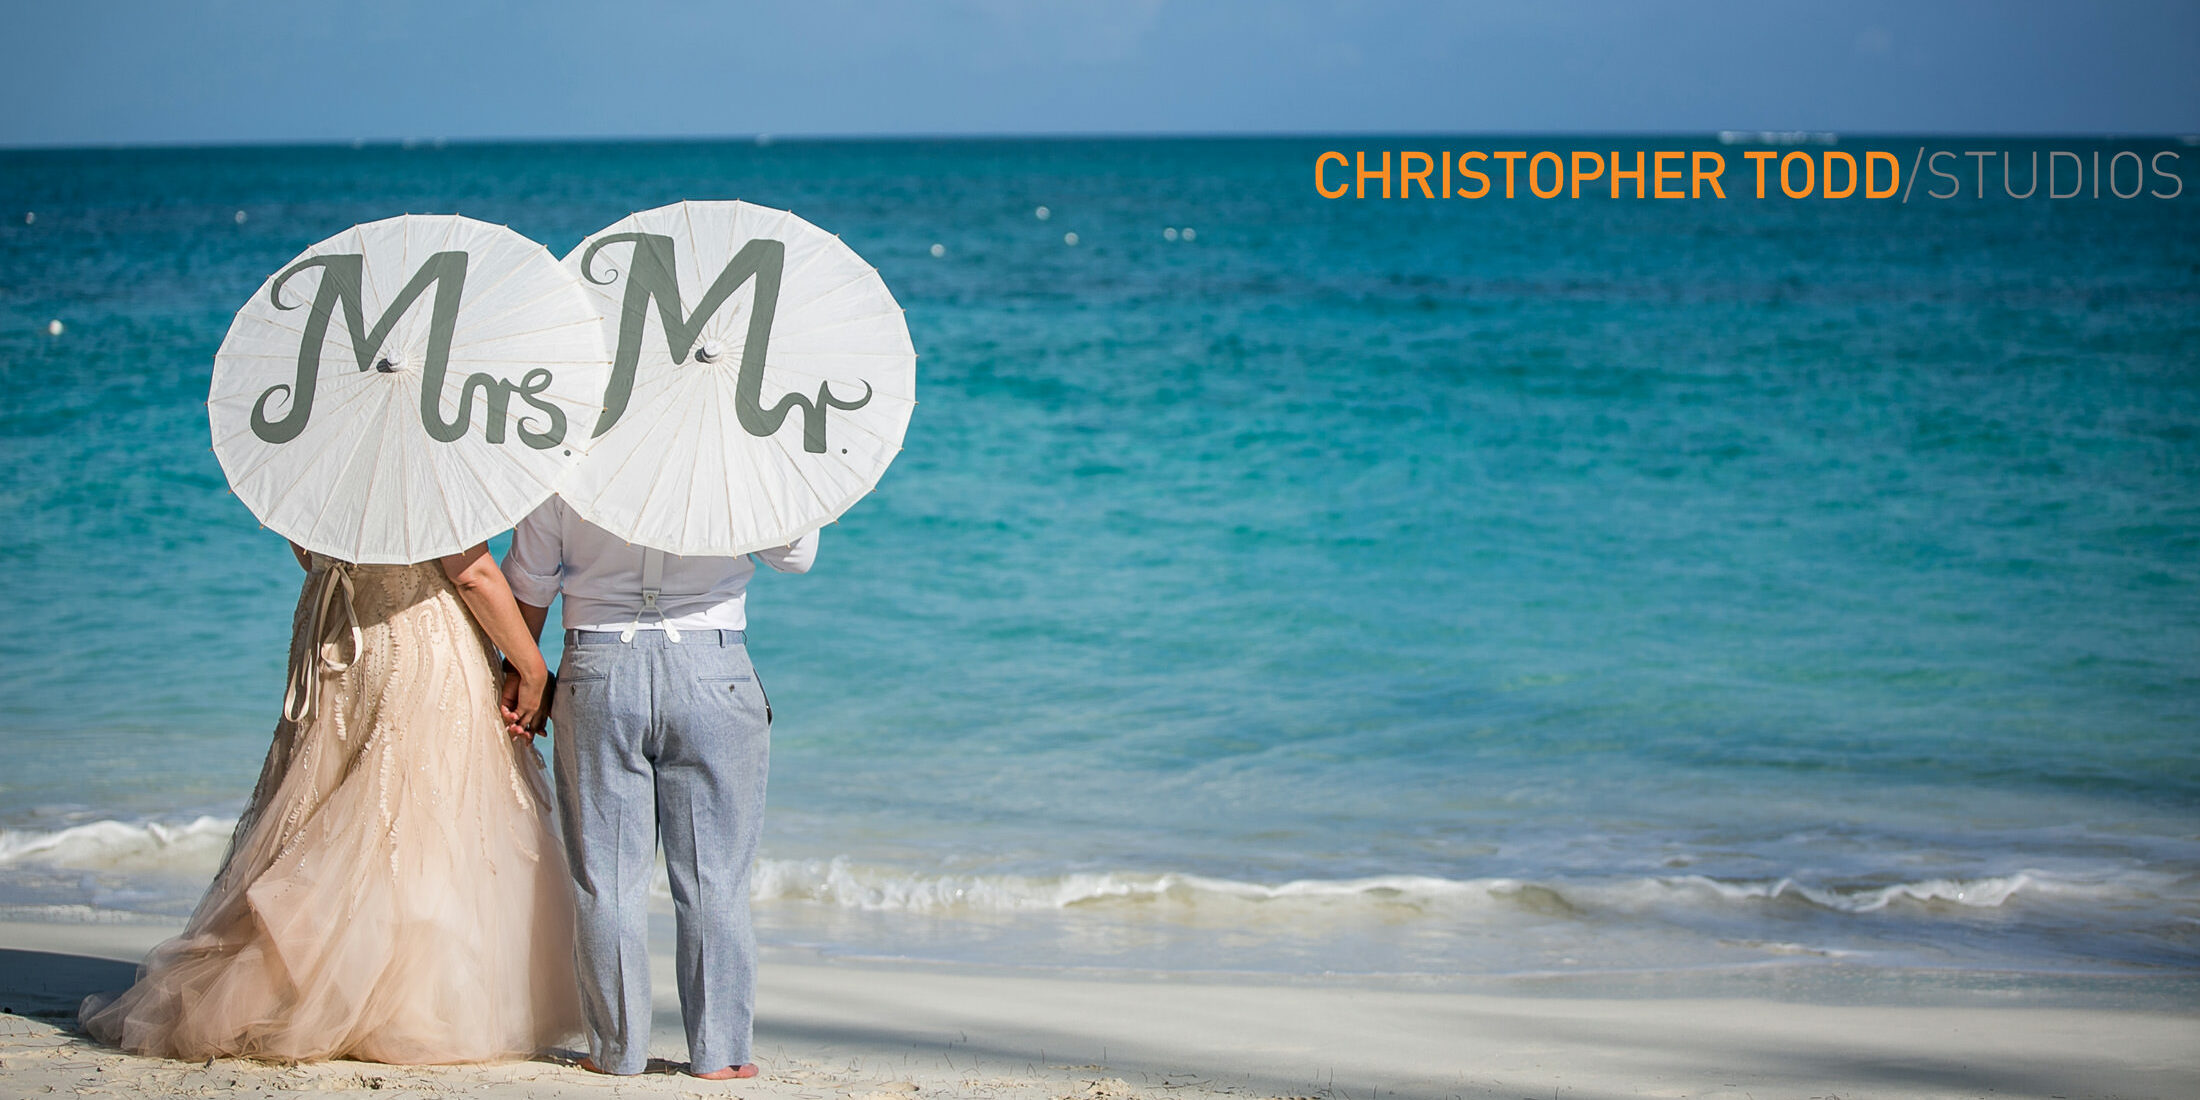 This Was Such A Special Elopement Had The Priviladge To Capture This Couples Vow Exchange In Turks And Caicos. What An Adventure.